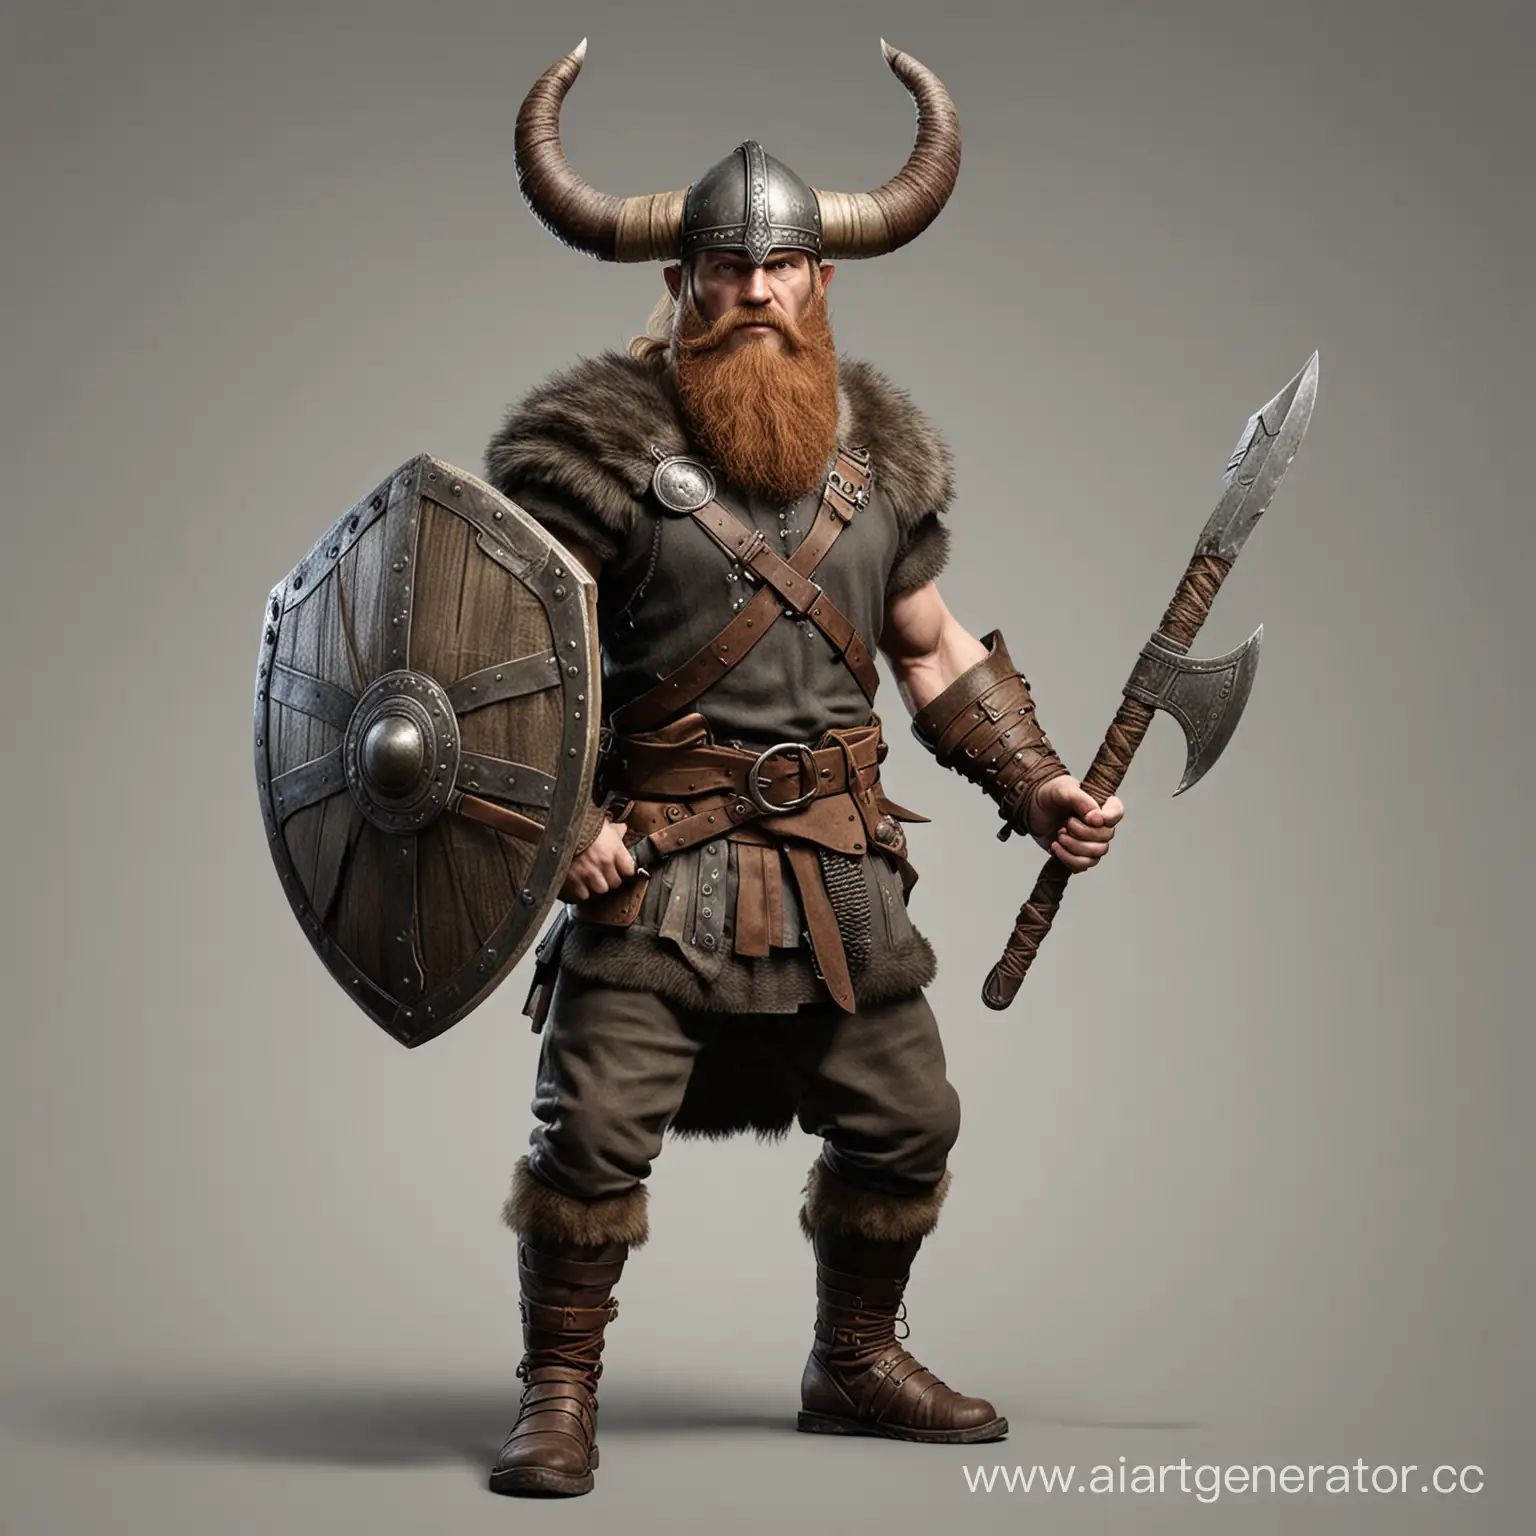 Draw a realistic Viking in a helmet with horns, a battle axe in his right hand, and a shield in his left, draw him half-sideways to us and in PNG format.